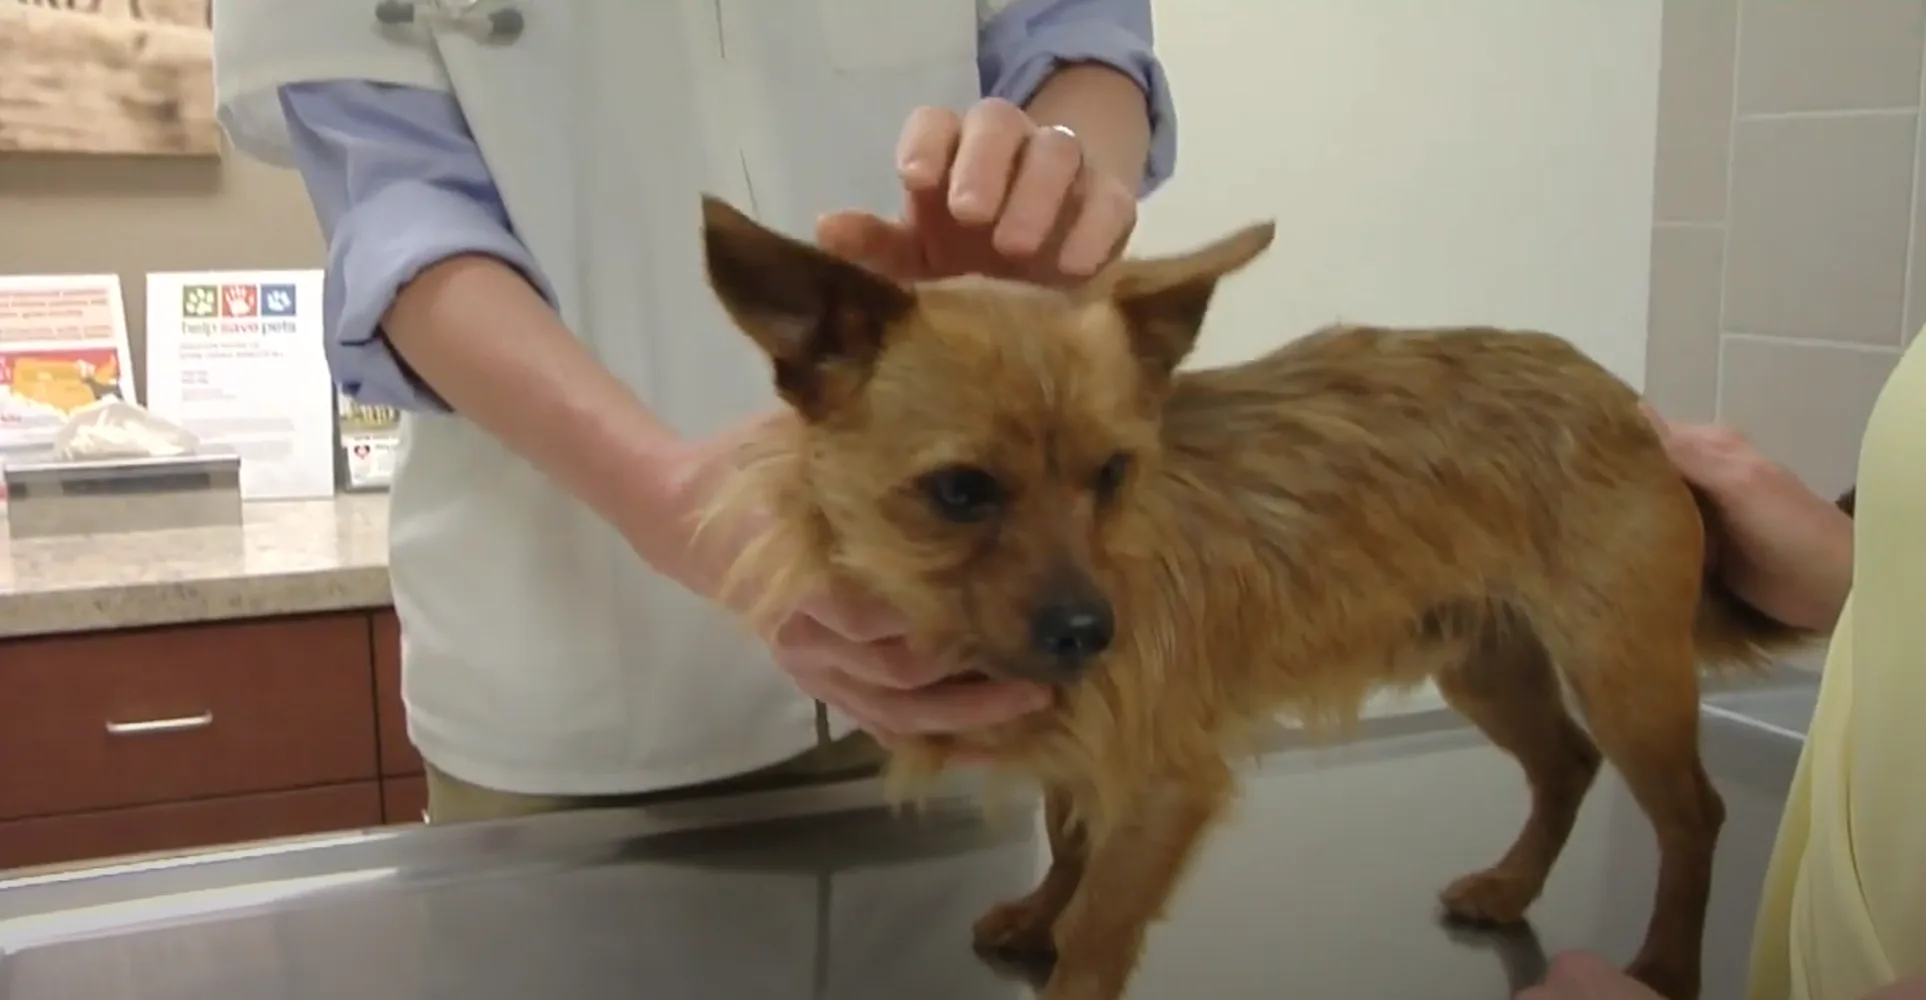 Preventing Canine Influenza video from Hinsdale Animal Hospital